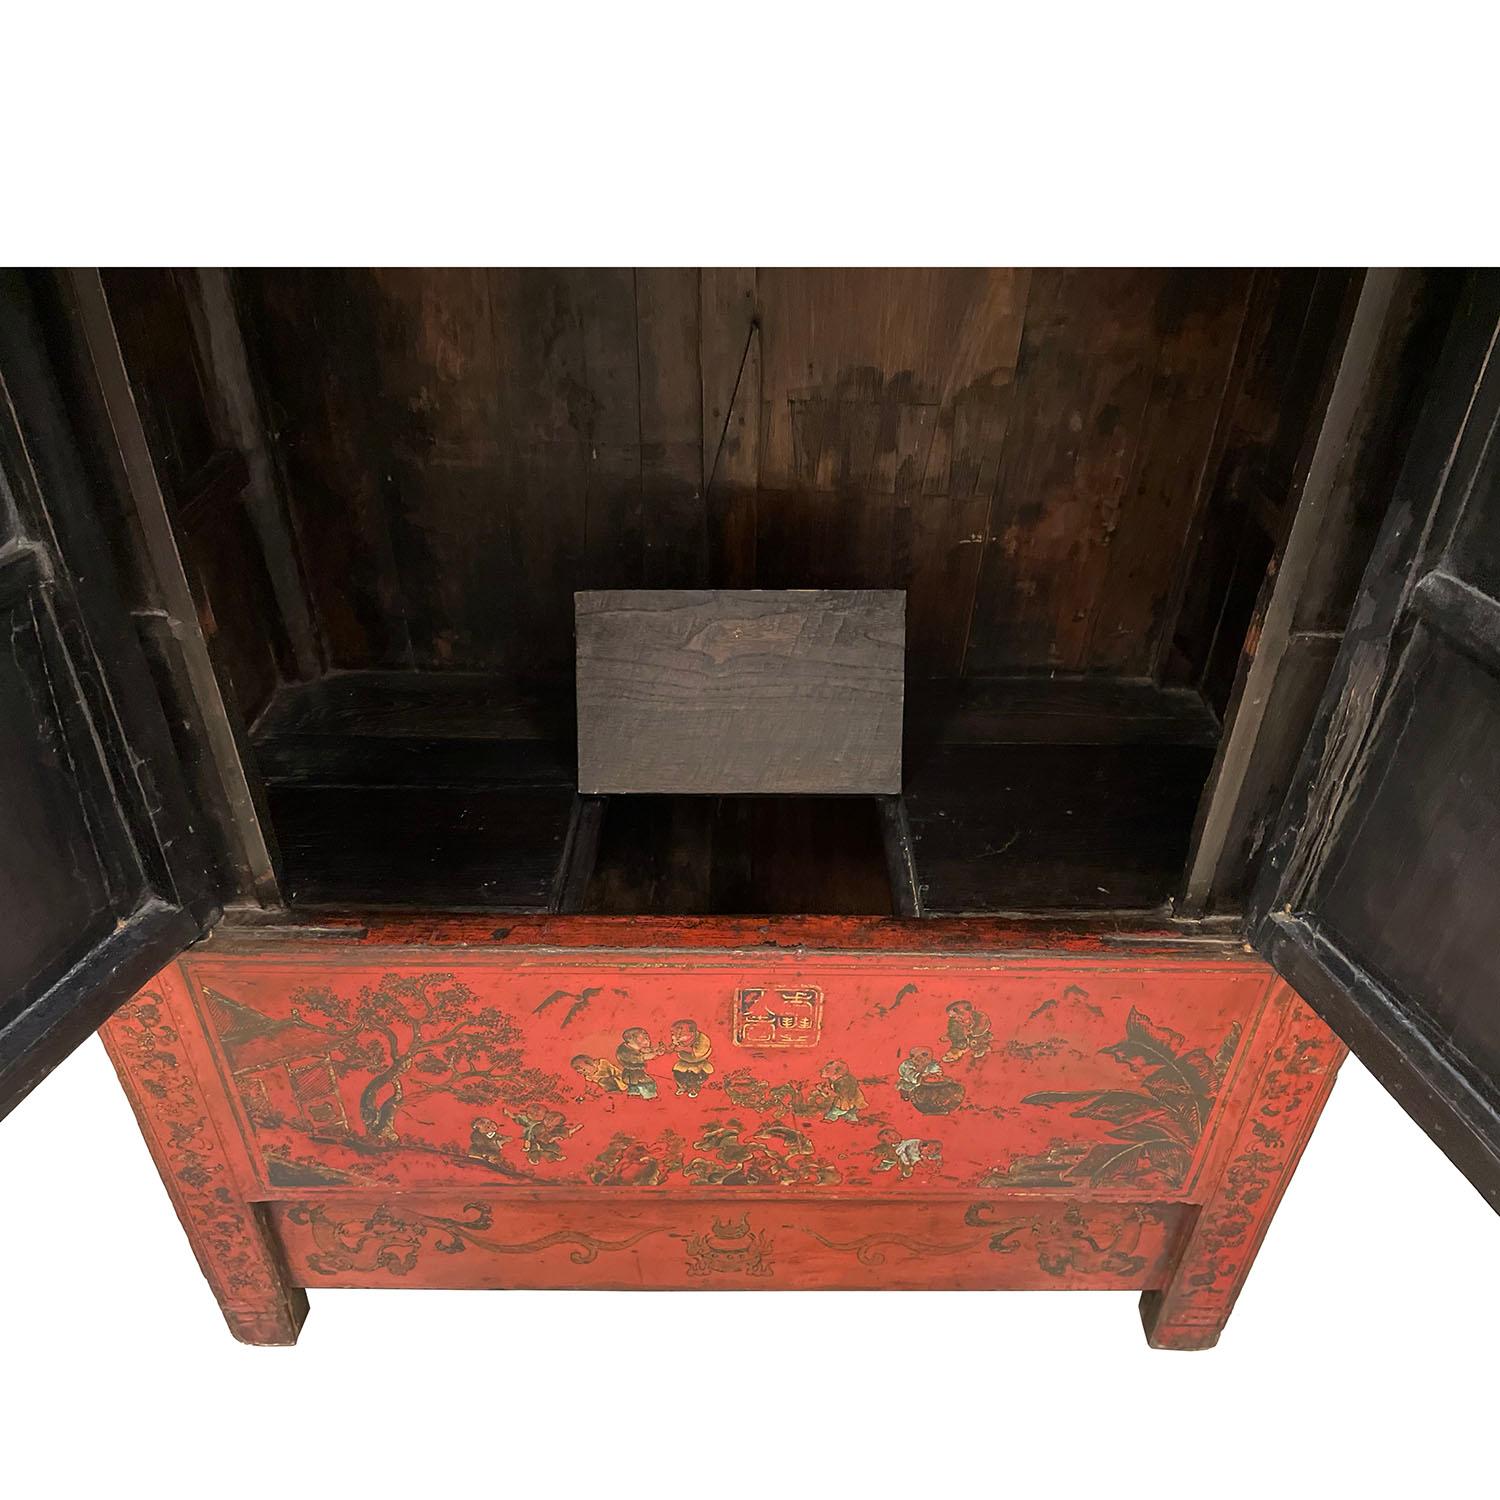 Antique Chinese Red Lacquered Wedding Armoire, Wardrobe With 100s Kids In Good Condition For Sale In Pomona, CA